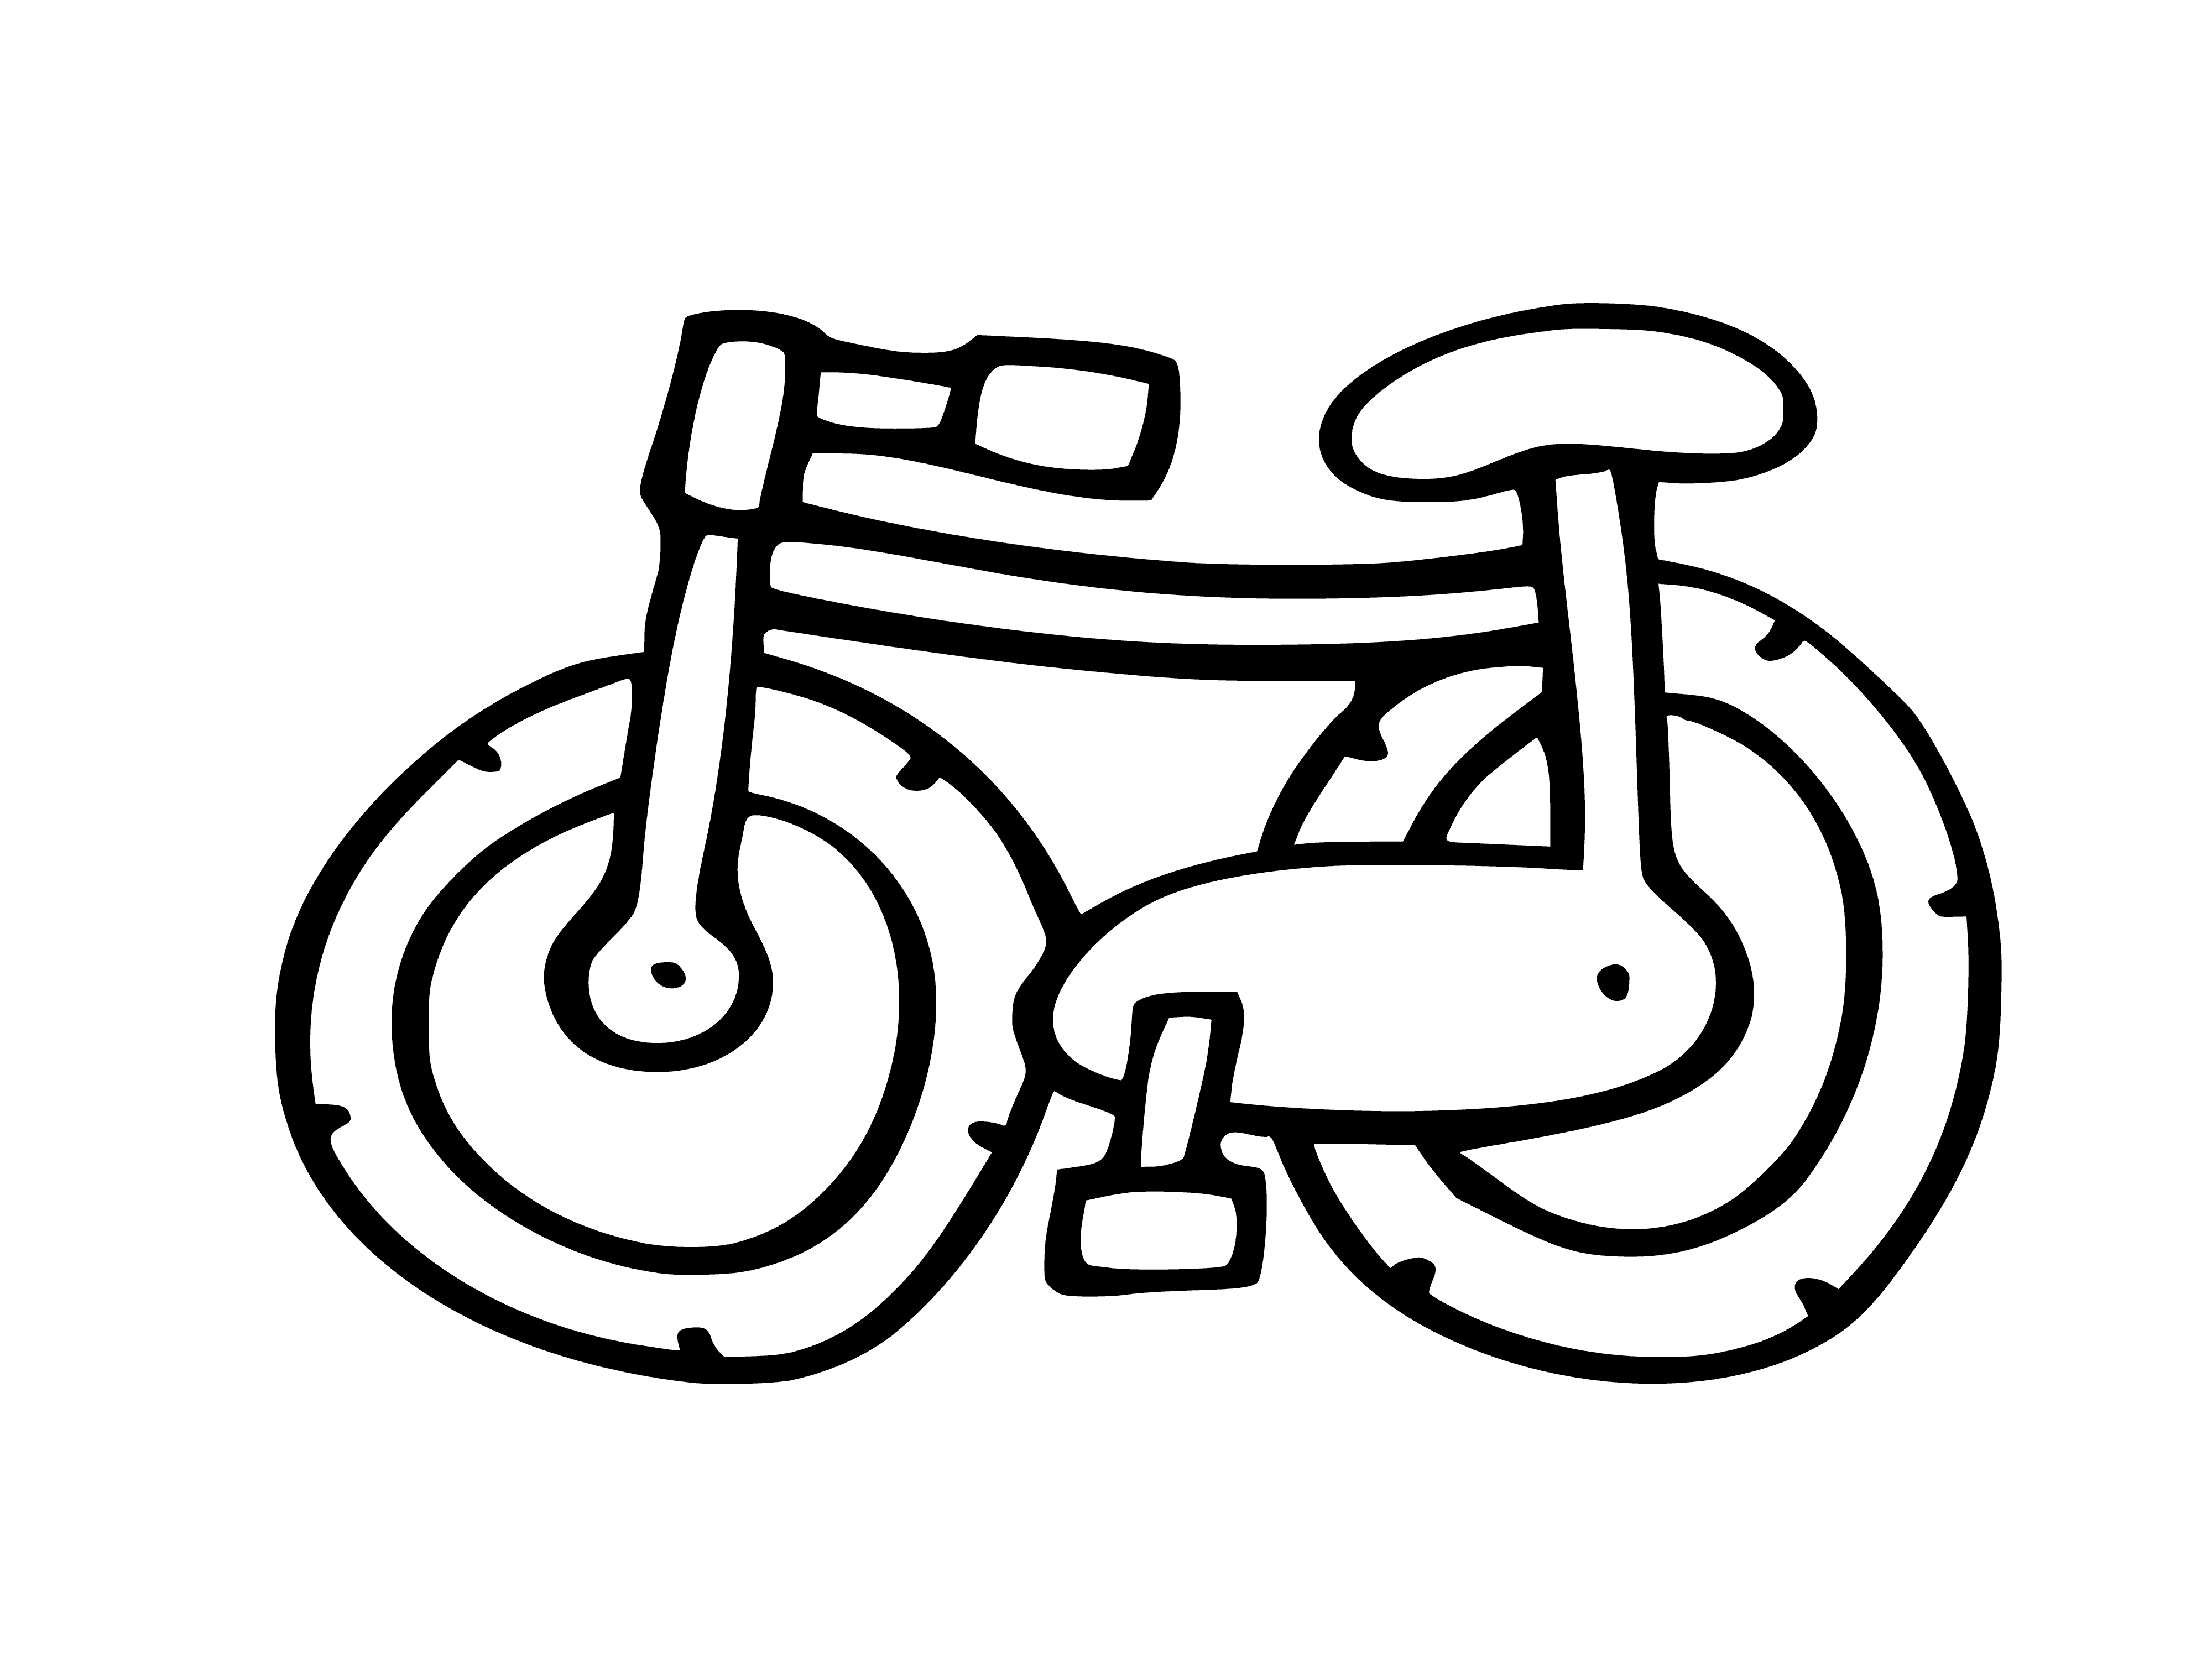 coloring page: Two kids on bikes: red & blue, both have helmets & the red one has a pack, smiles all around.